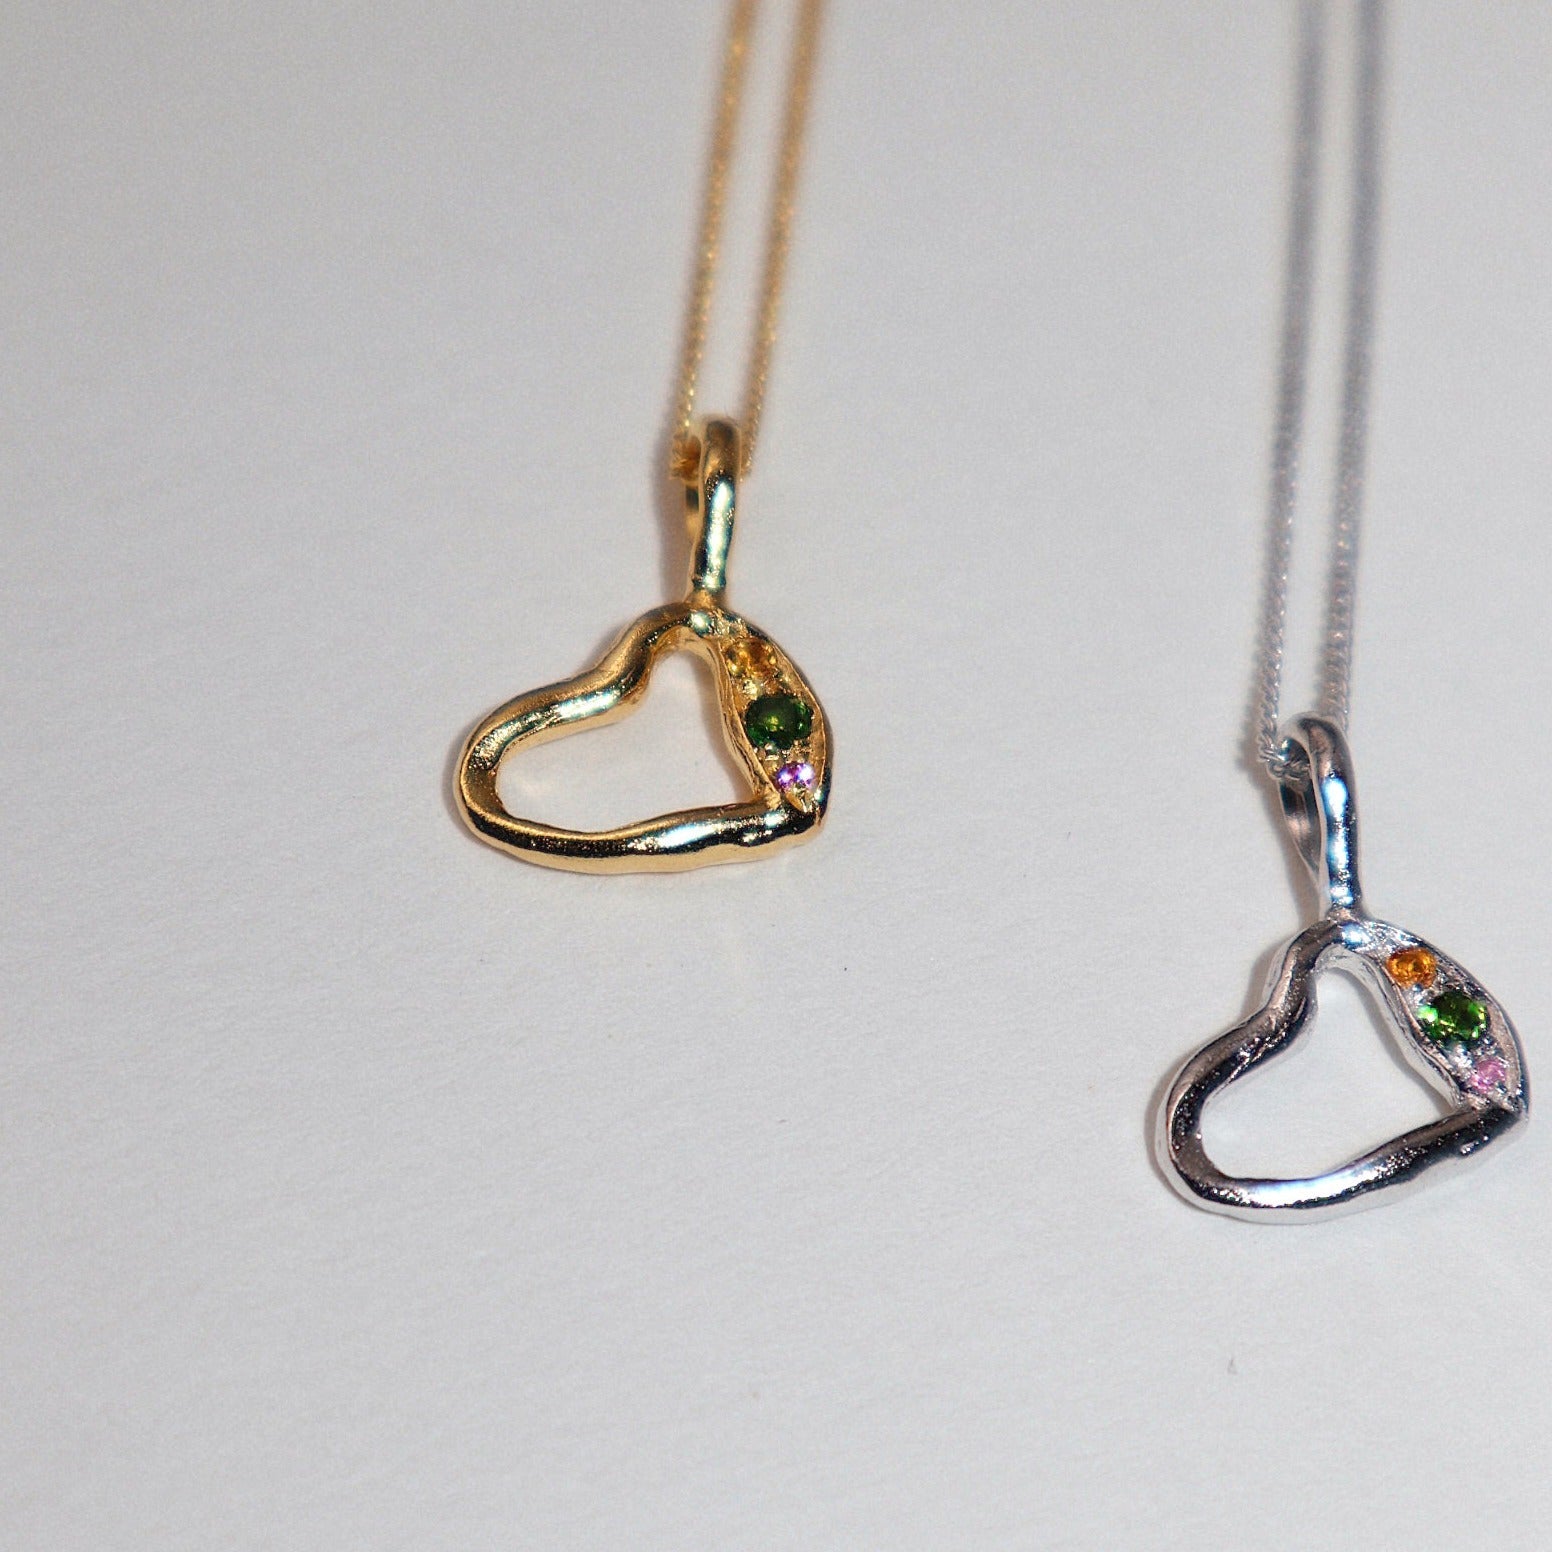 'Mixed Emotion' Heart Necklace